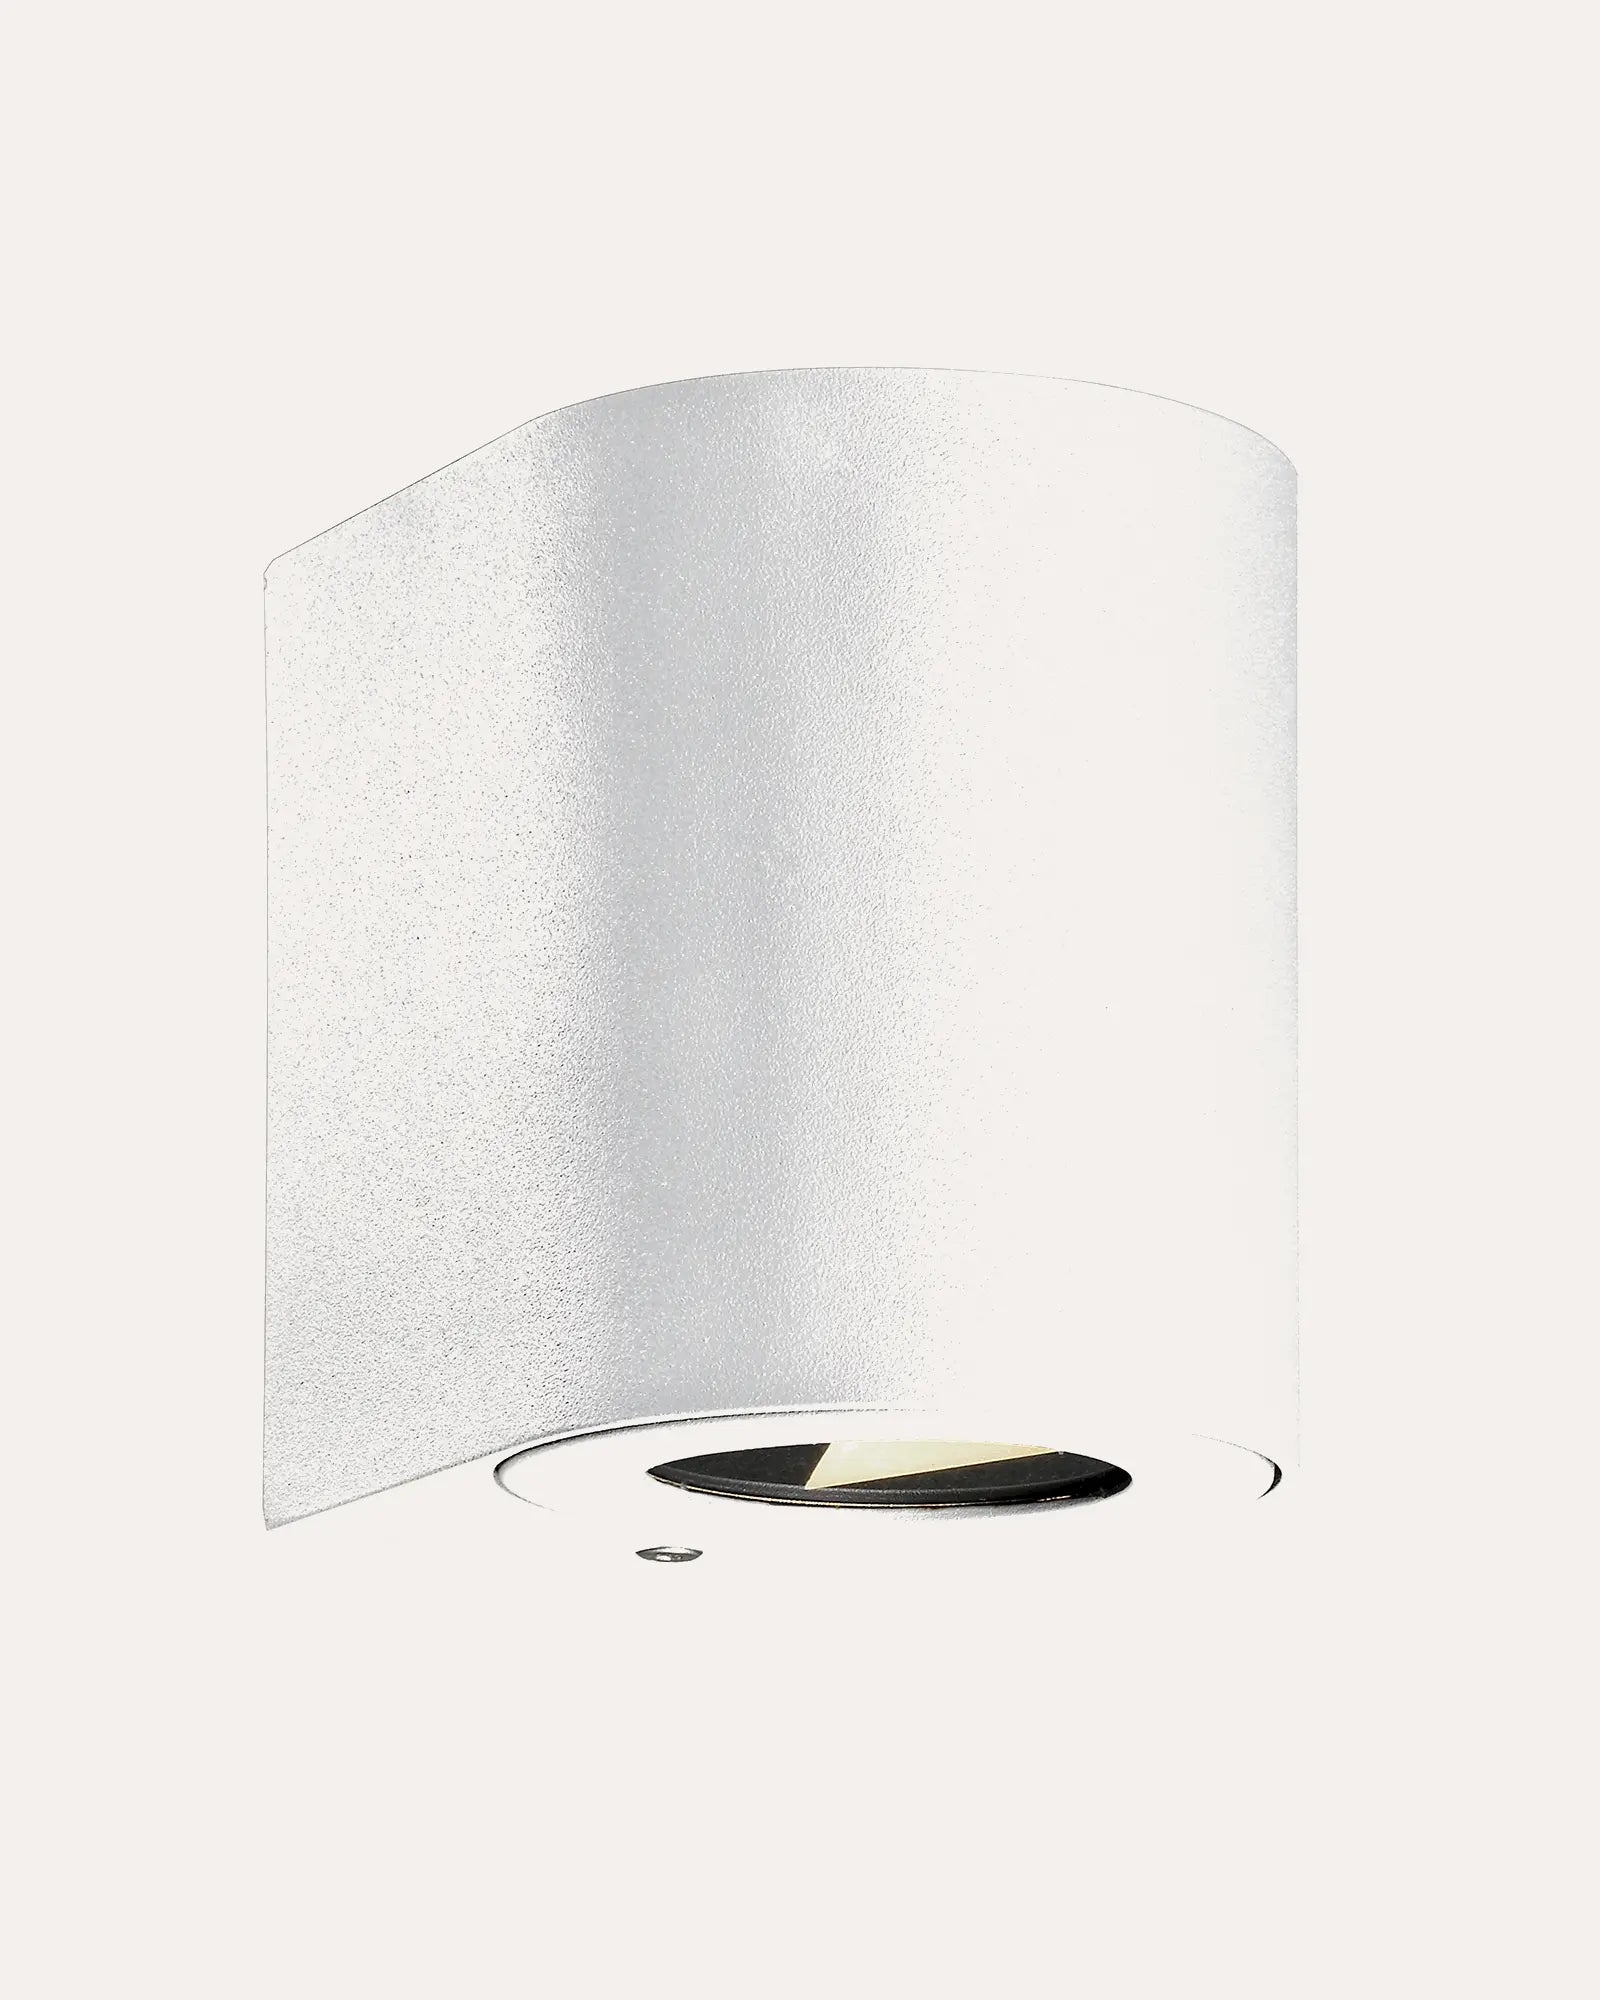 Canto 2 small minimal Scandinavian up and down light white